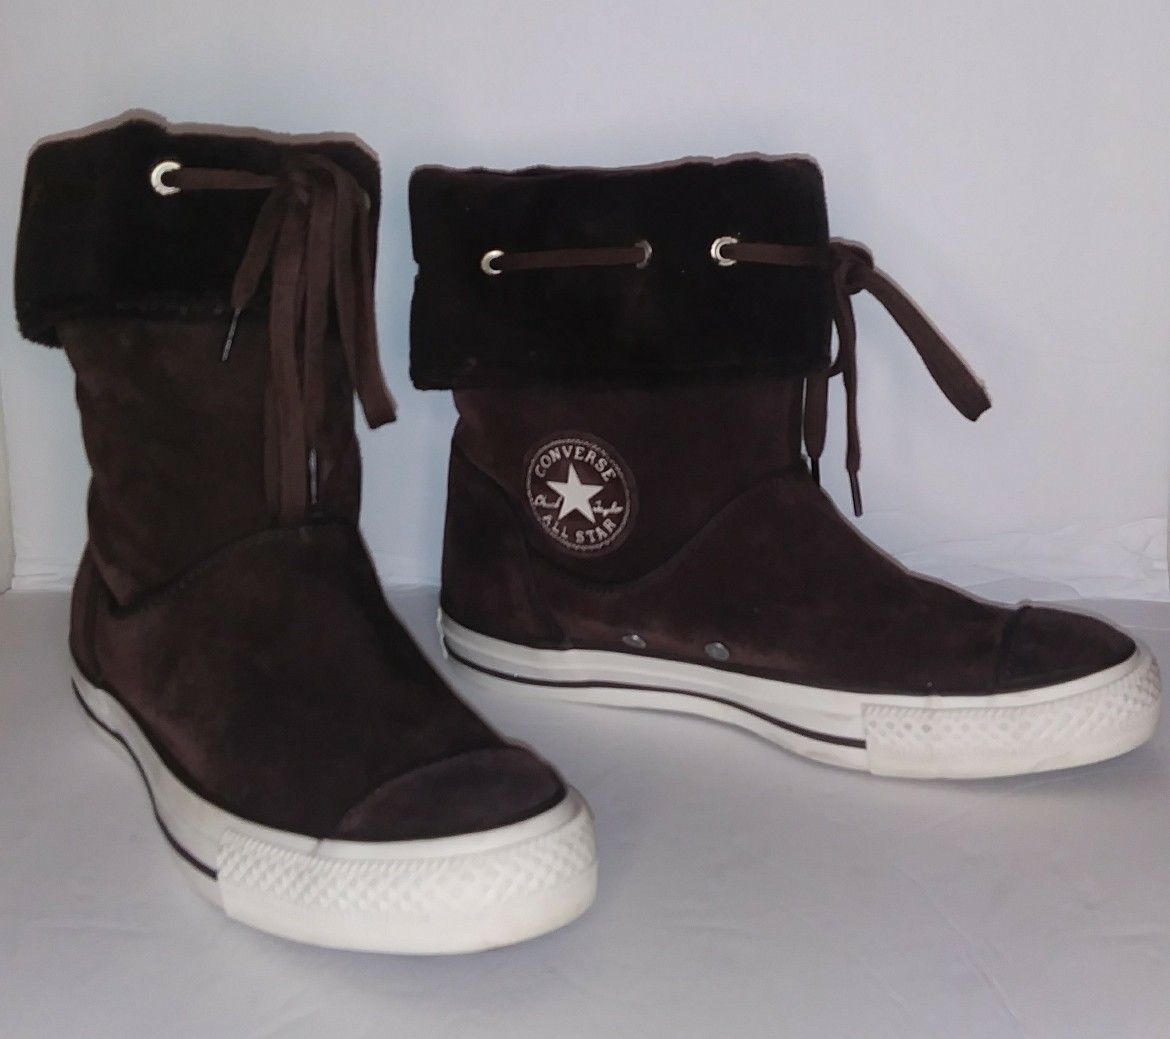 Converse All Star Chuck Taylor Women's Andover Brown Suede Sneaker Boots. Size 8